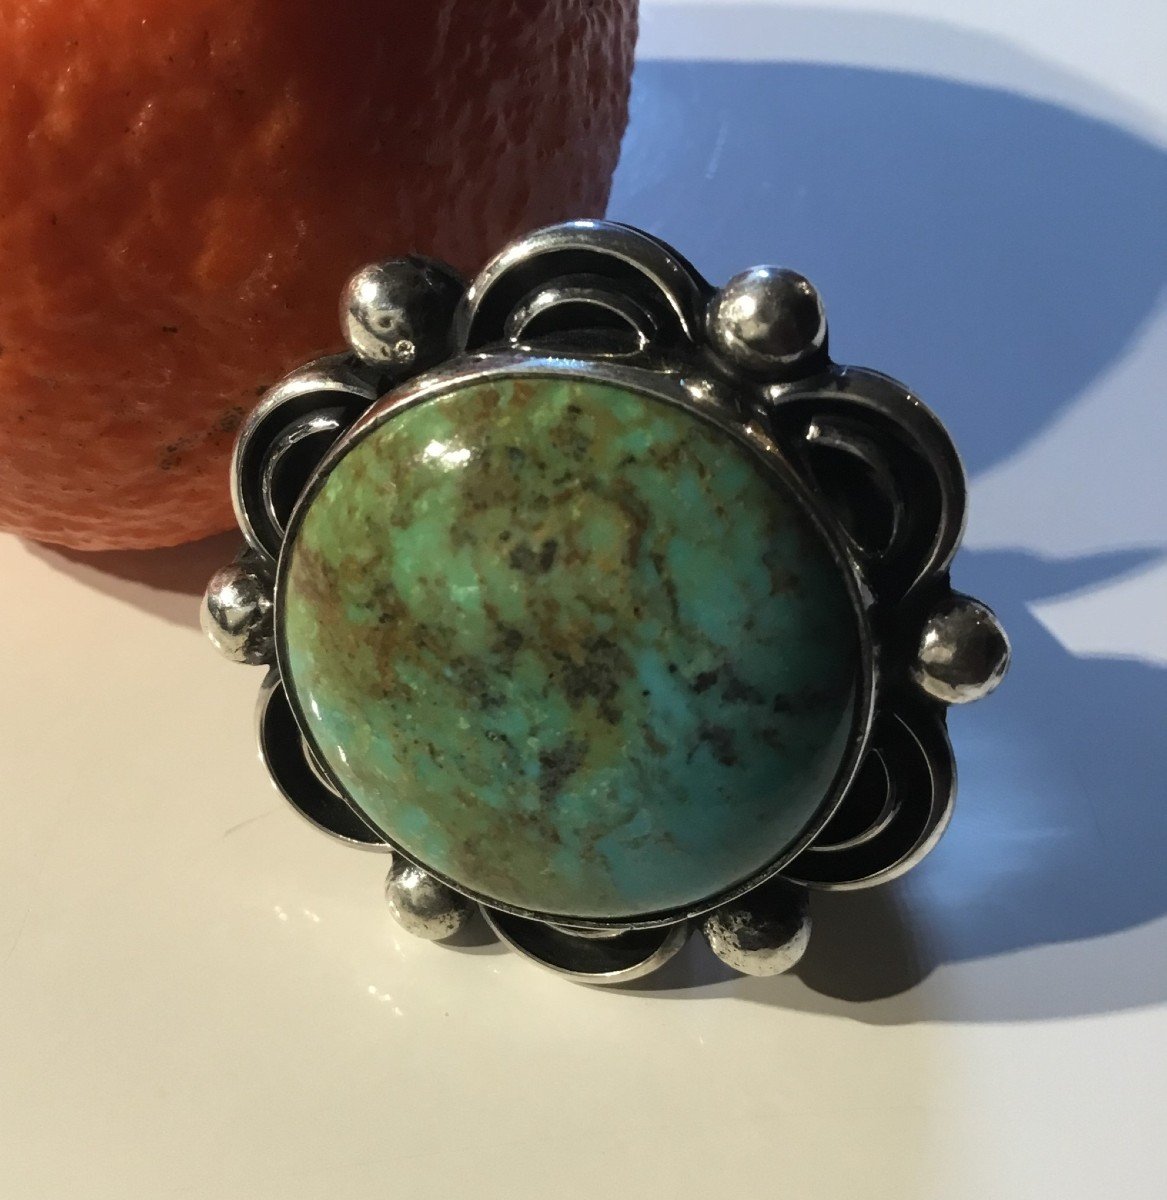 Silver And Turquoise Ring